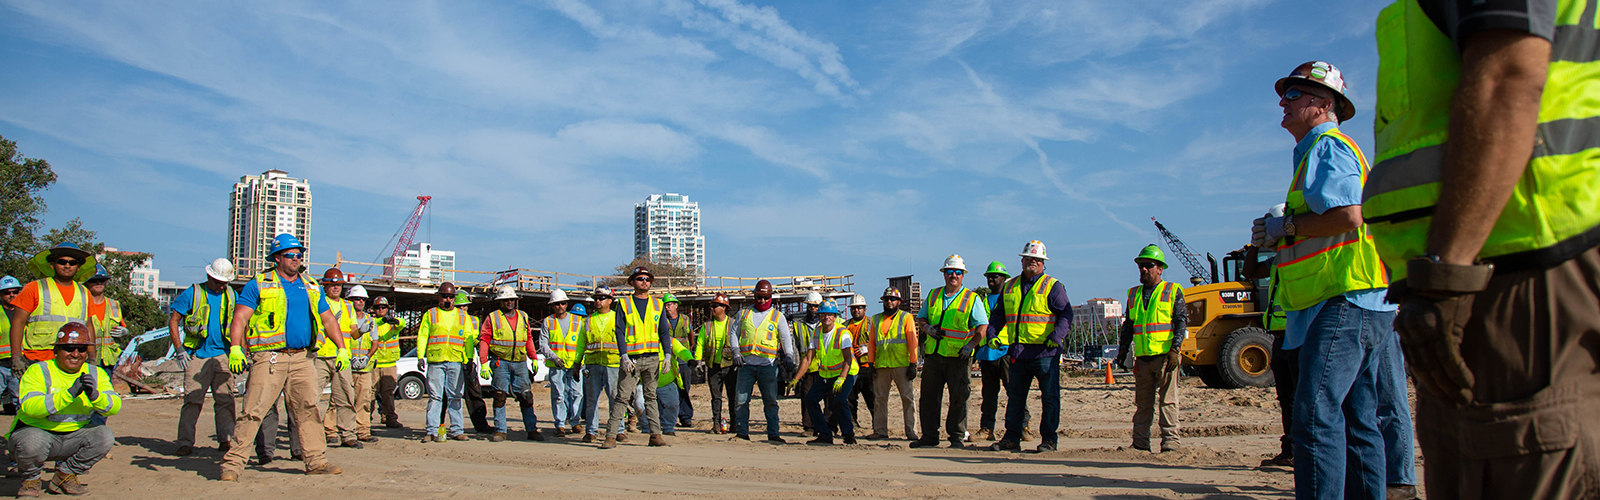 The Skanska USA construction crew at St. Pete Pier during Safety Week.